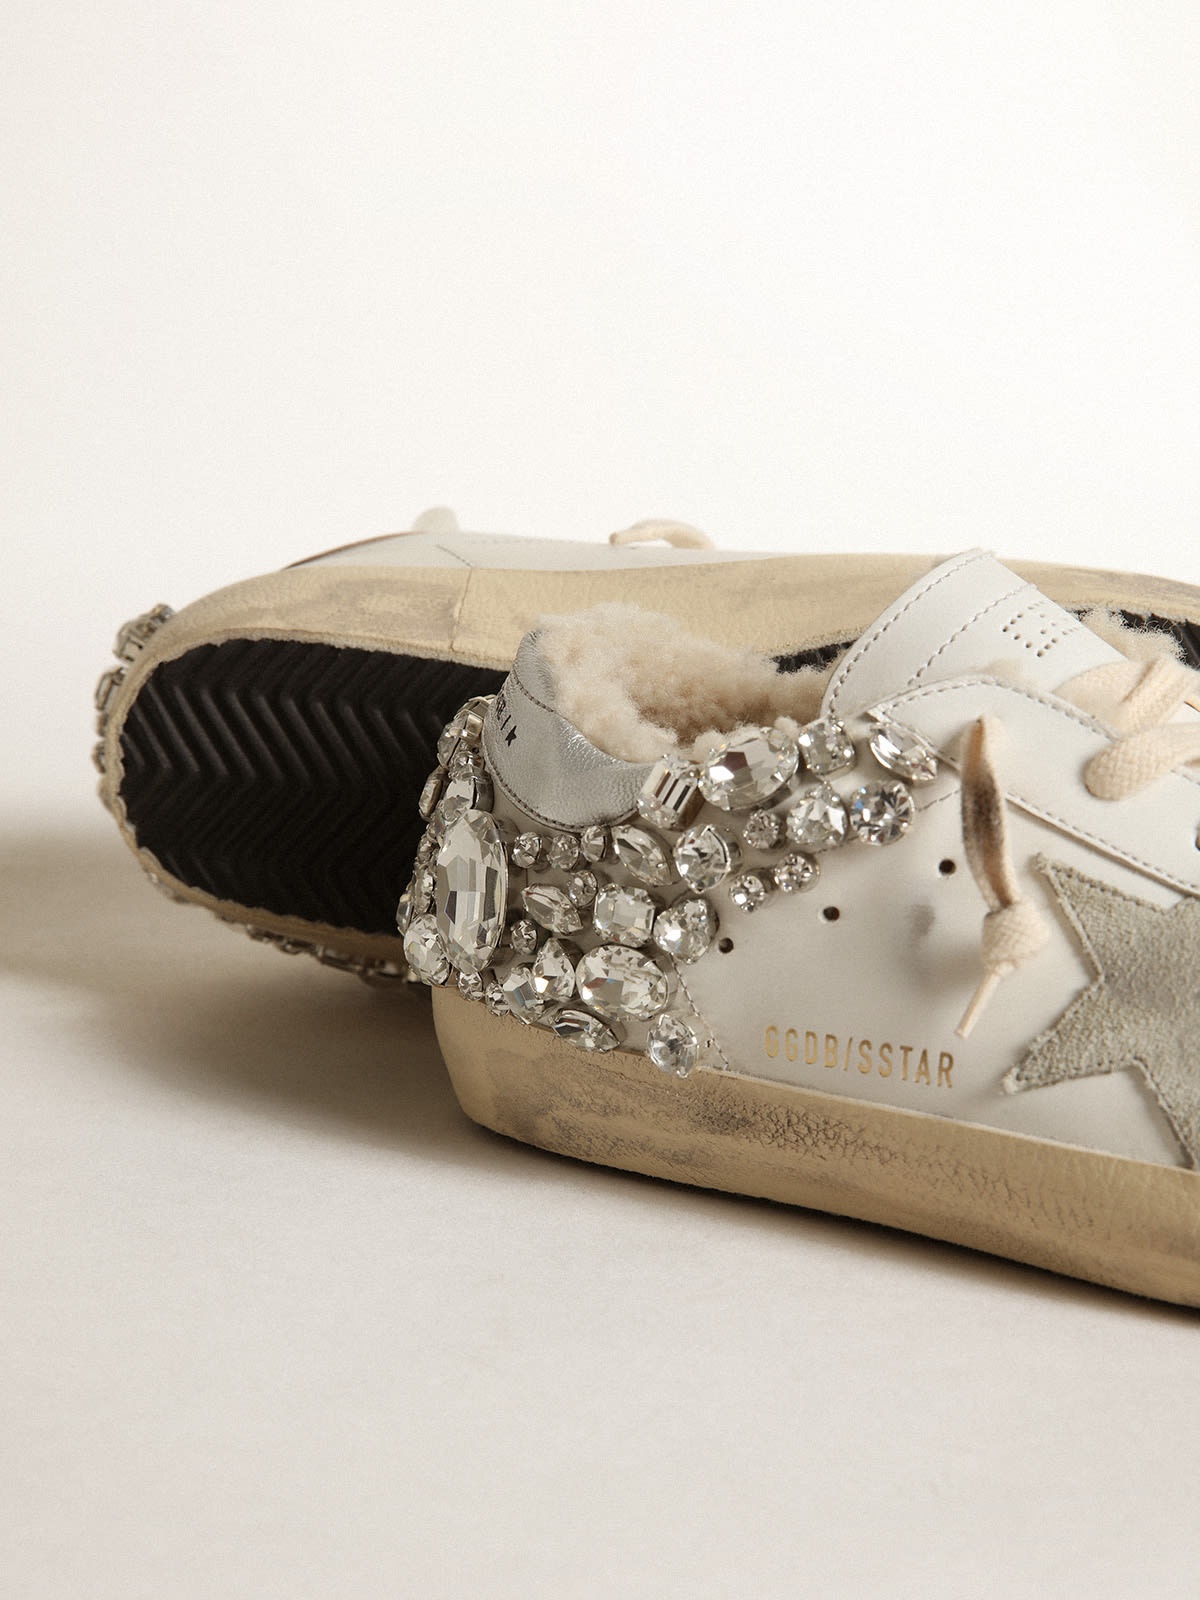 Super-Star sneakers with shearling lining and decorative crystals - 3